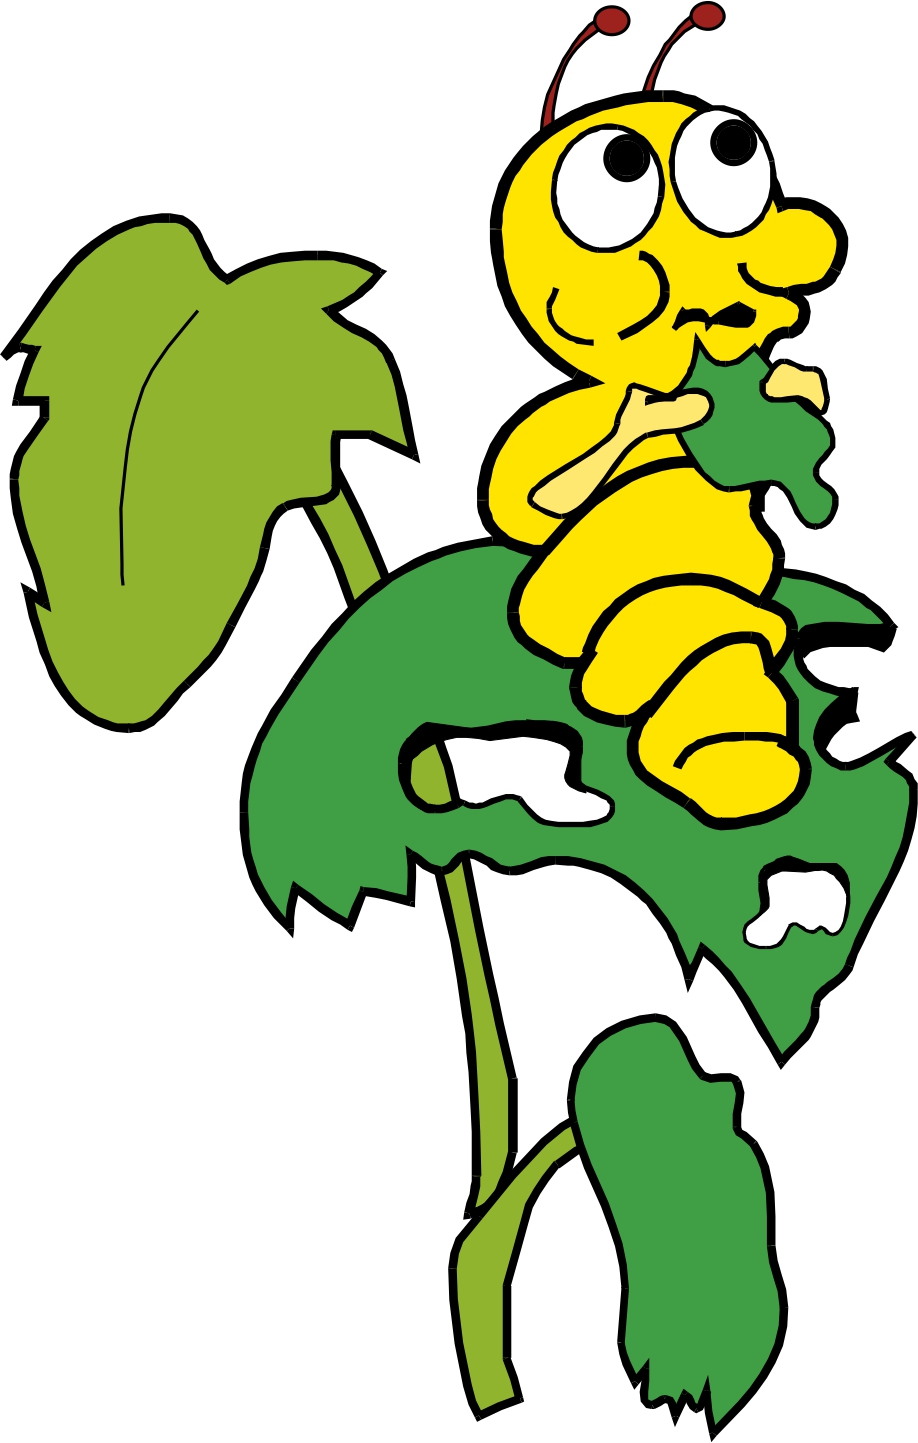 Caterpillar clipart leaf.  collection of on